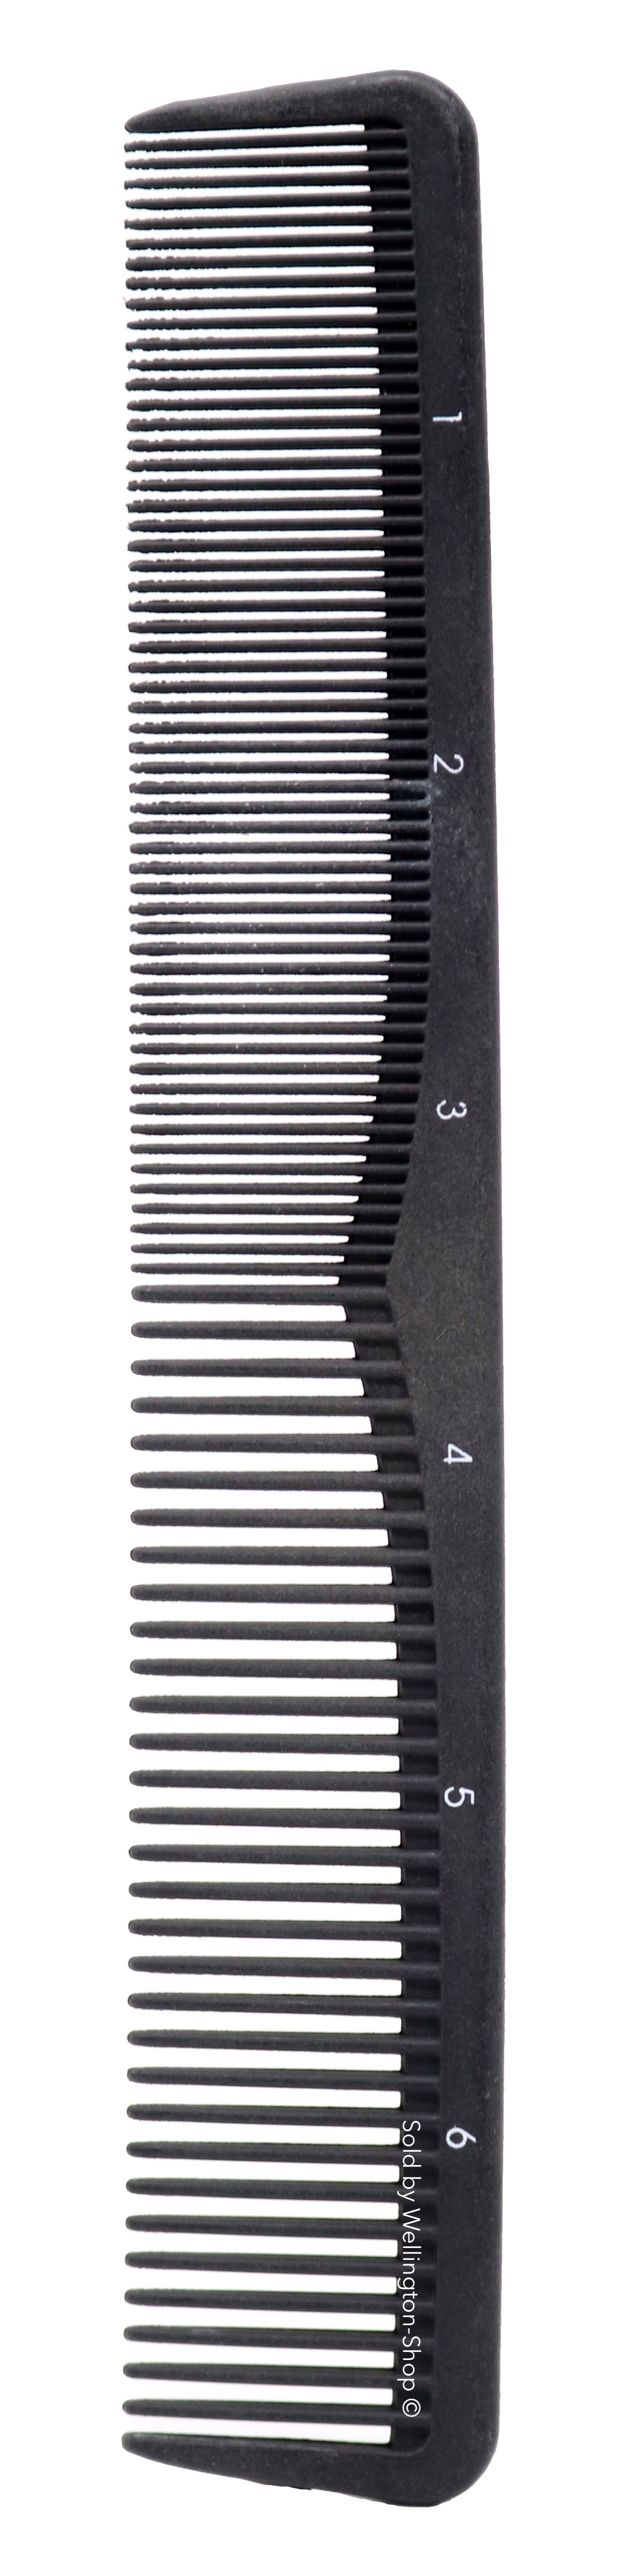 7 In. Salonchic Hight Heat Resistant Carbon Comb. Hair cutting Comb.